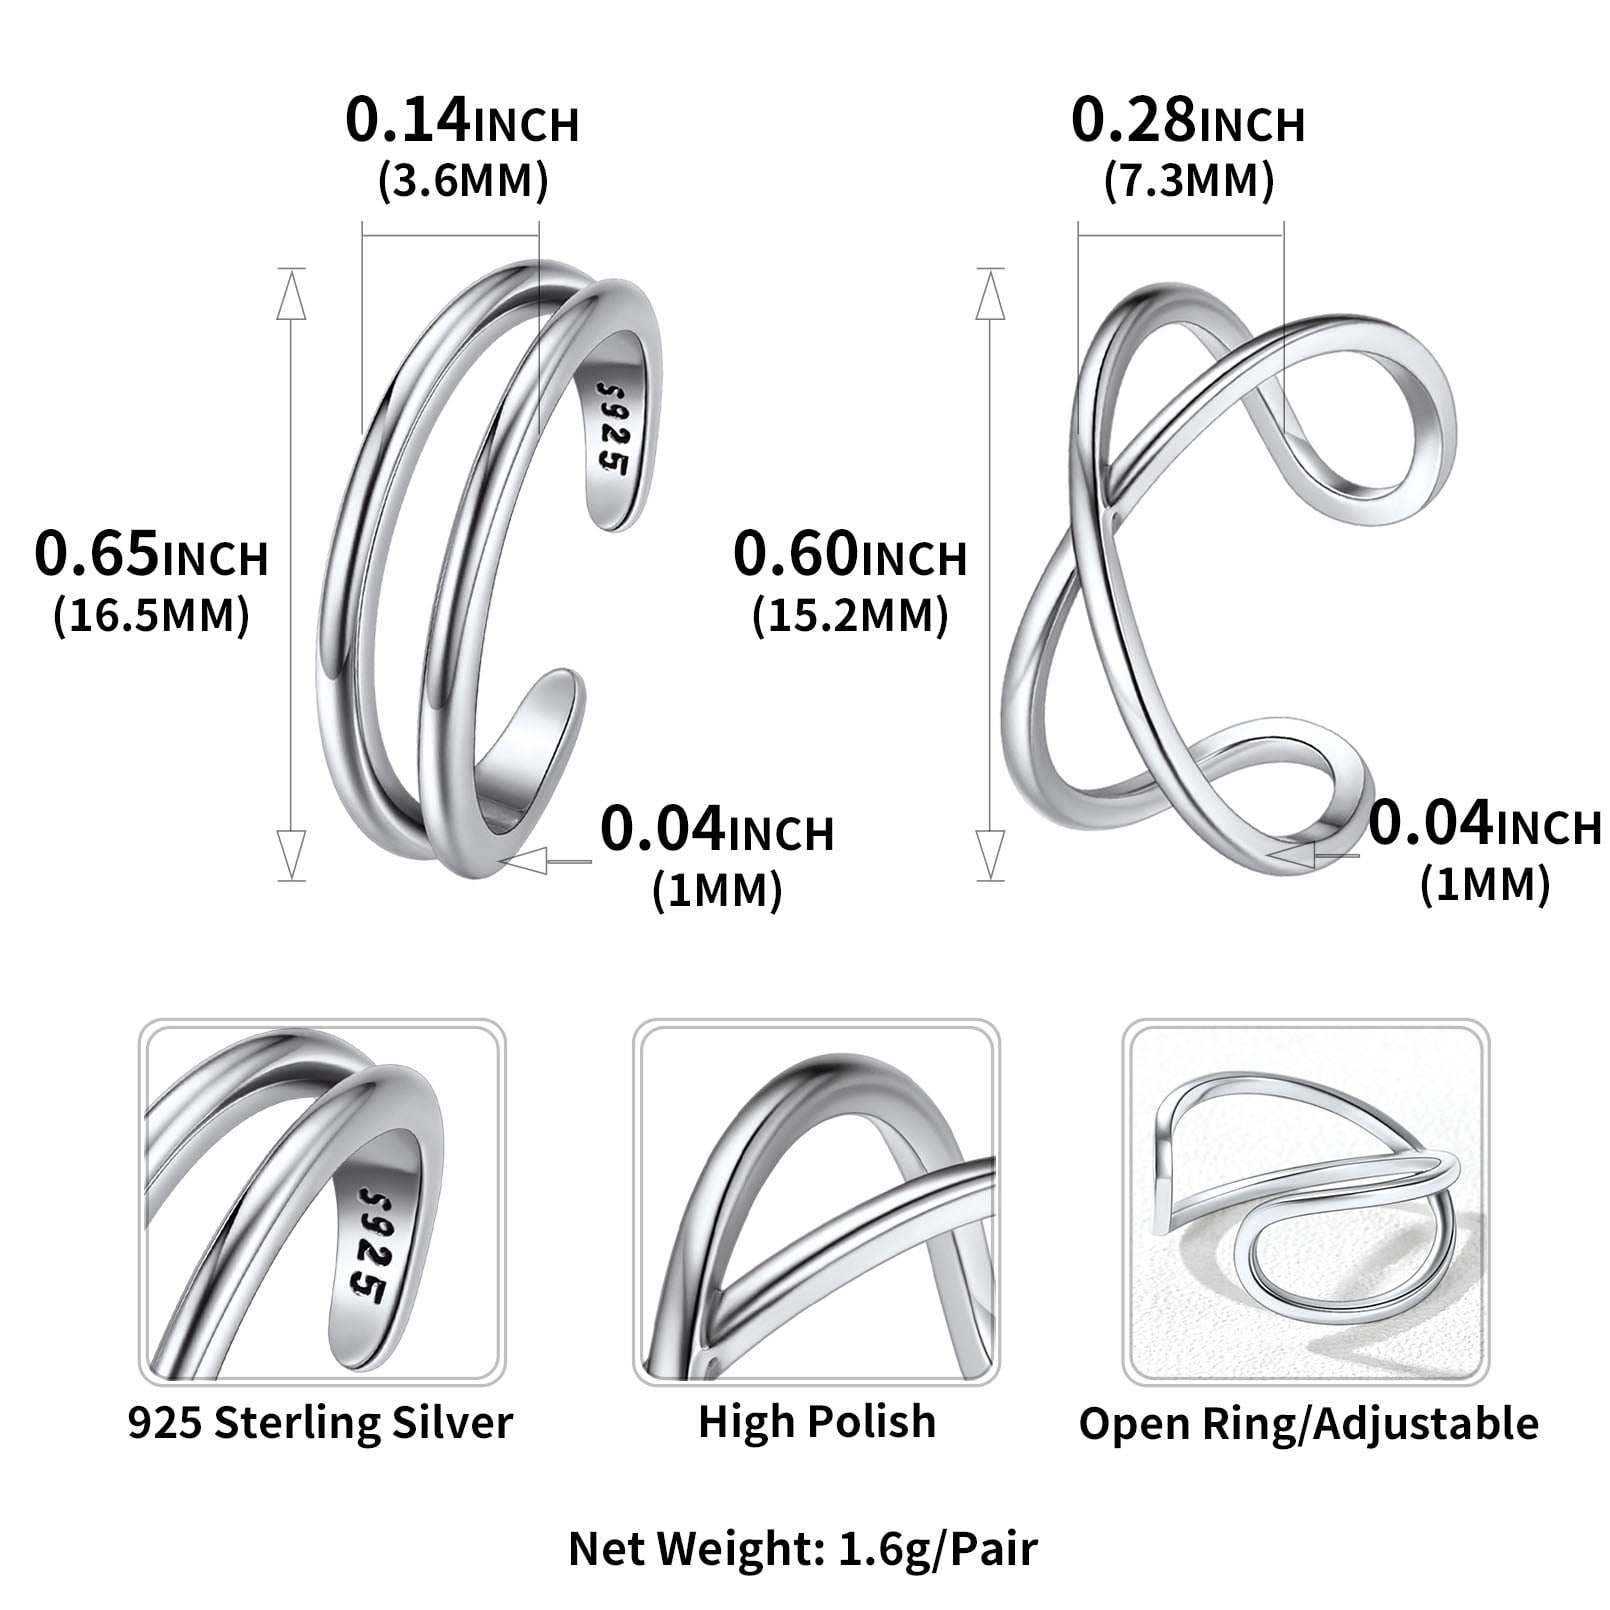 IEFSHINY 9pcs Toe Rings for Women Hypoallergenic Adjustable Rings Toe Ring  Foot Jewelry